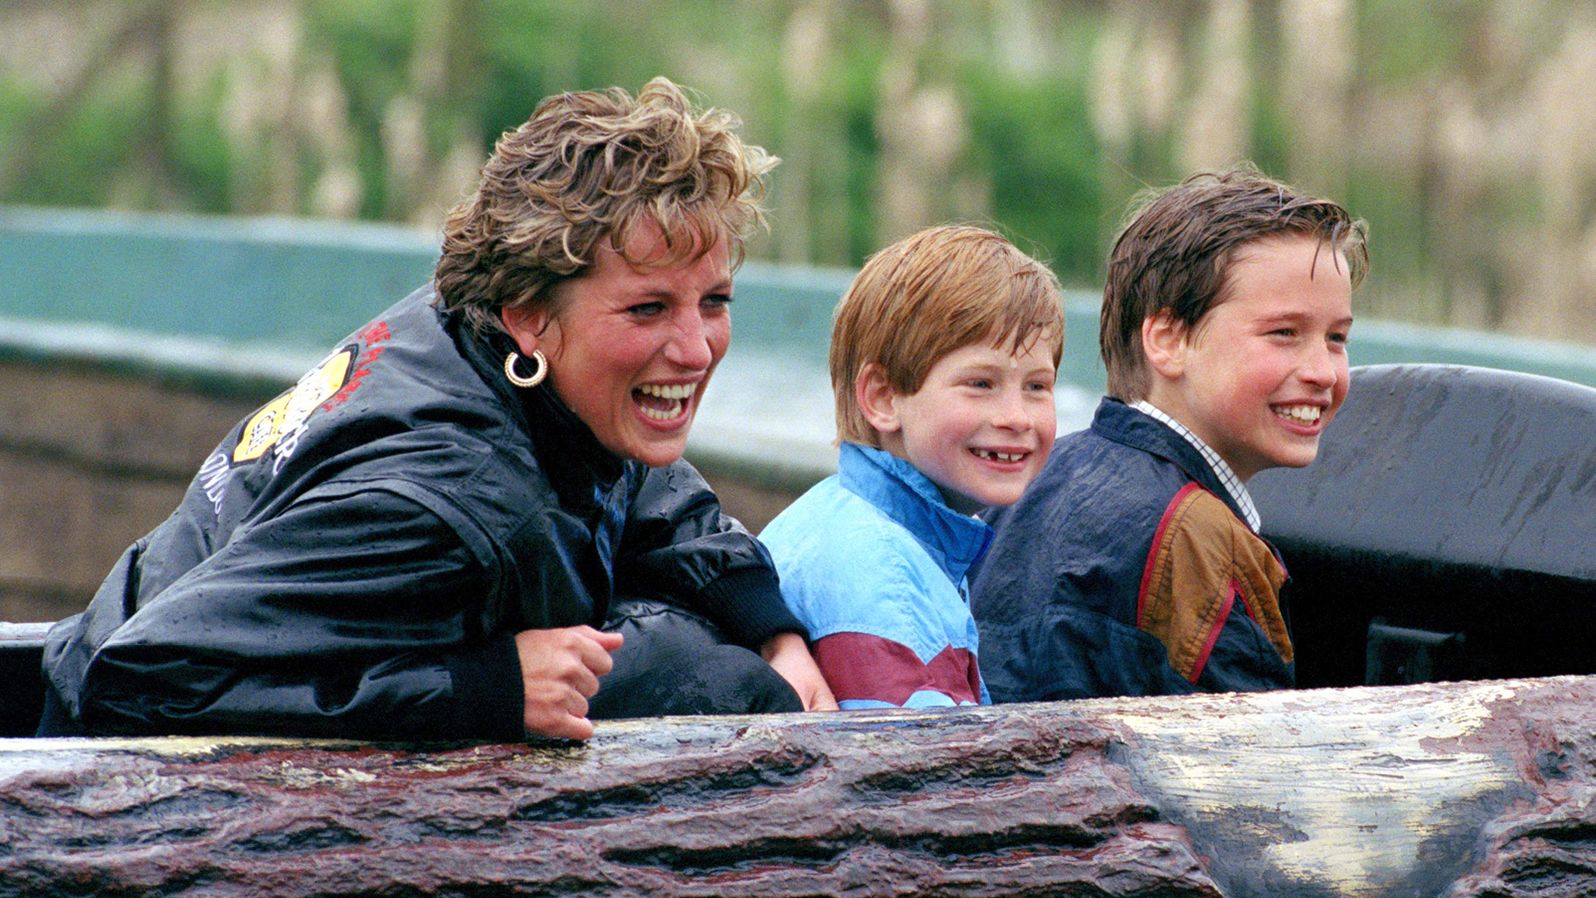 Diana and her sons visit Thorpe Park, a theme park in Surrey, England, in April 1993. 